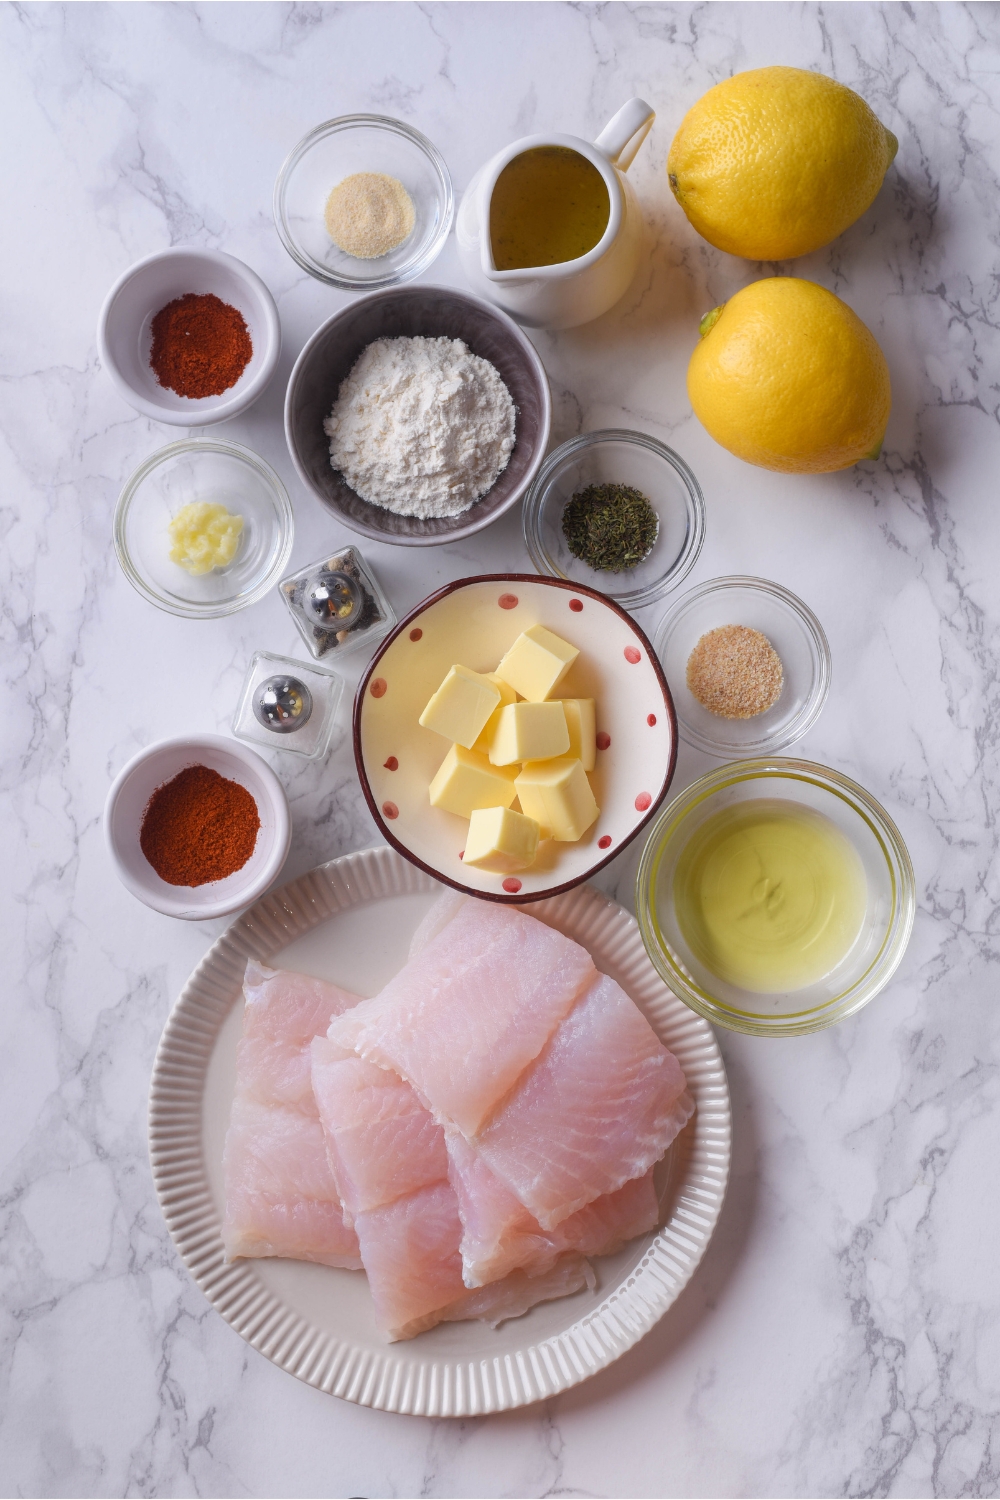 An assortment of ingredients including a plate of raw cod and bowls of butter, oil, spices, garlic, and two whole lemons.